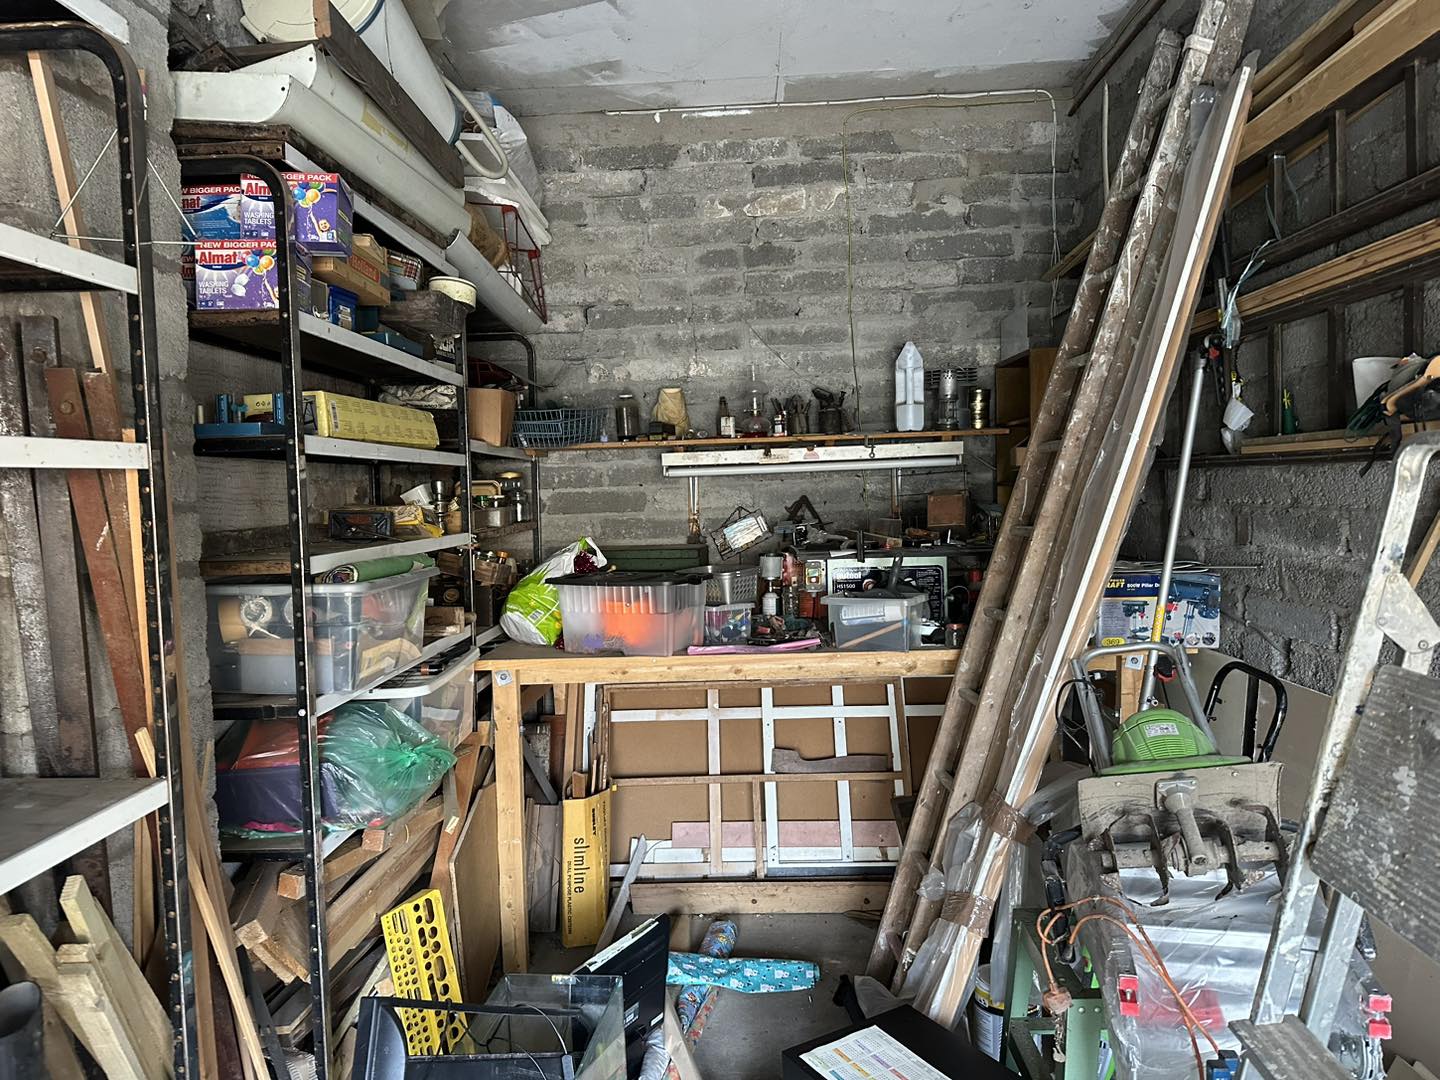 A close up photo of a garage full of junk